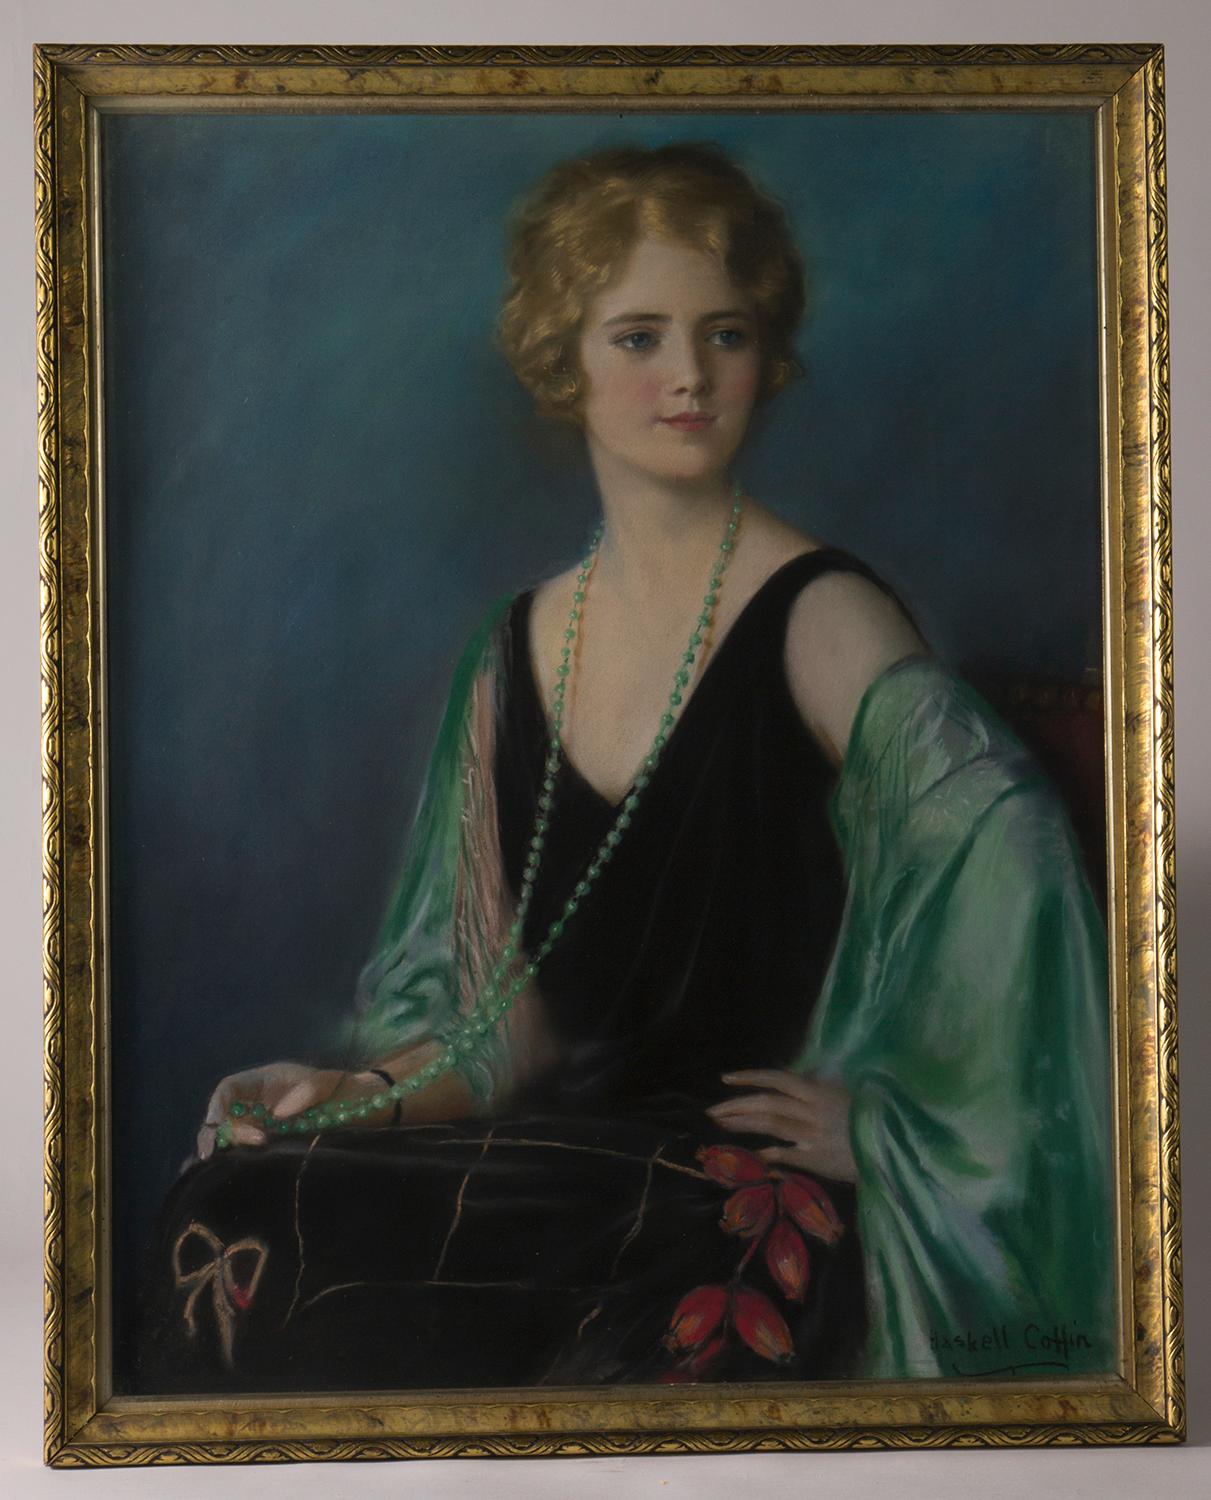 The Jade Necklace - Painting by William Haskell Coffin